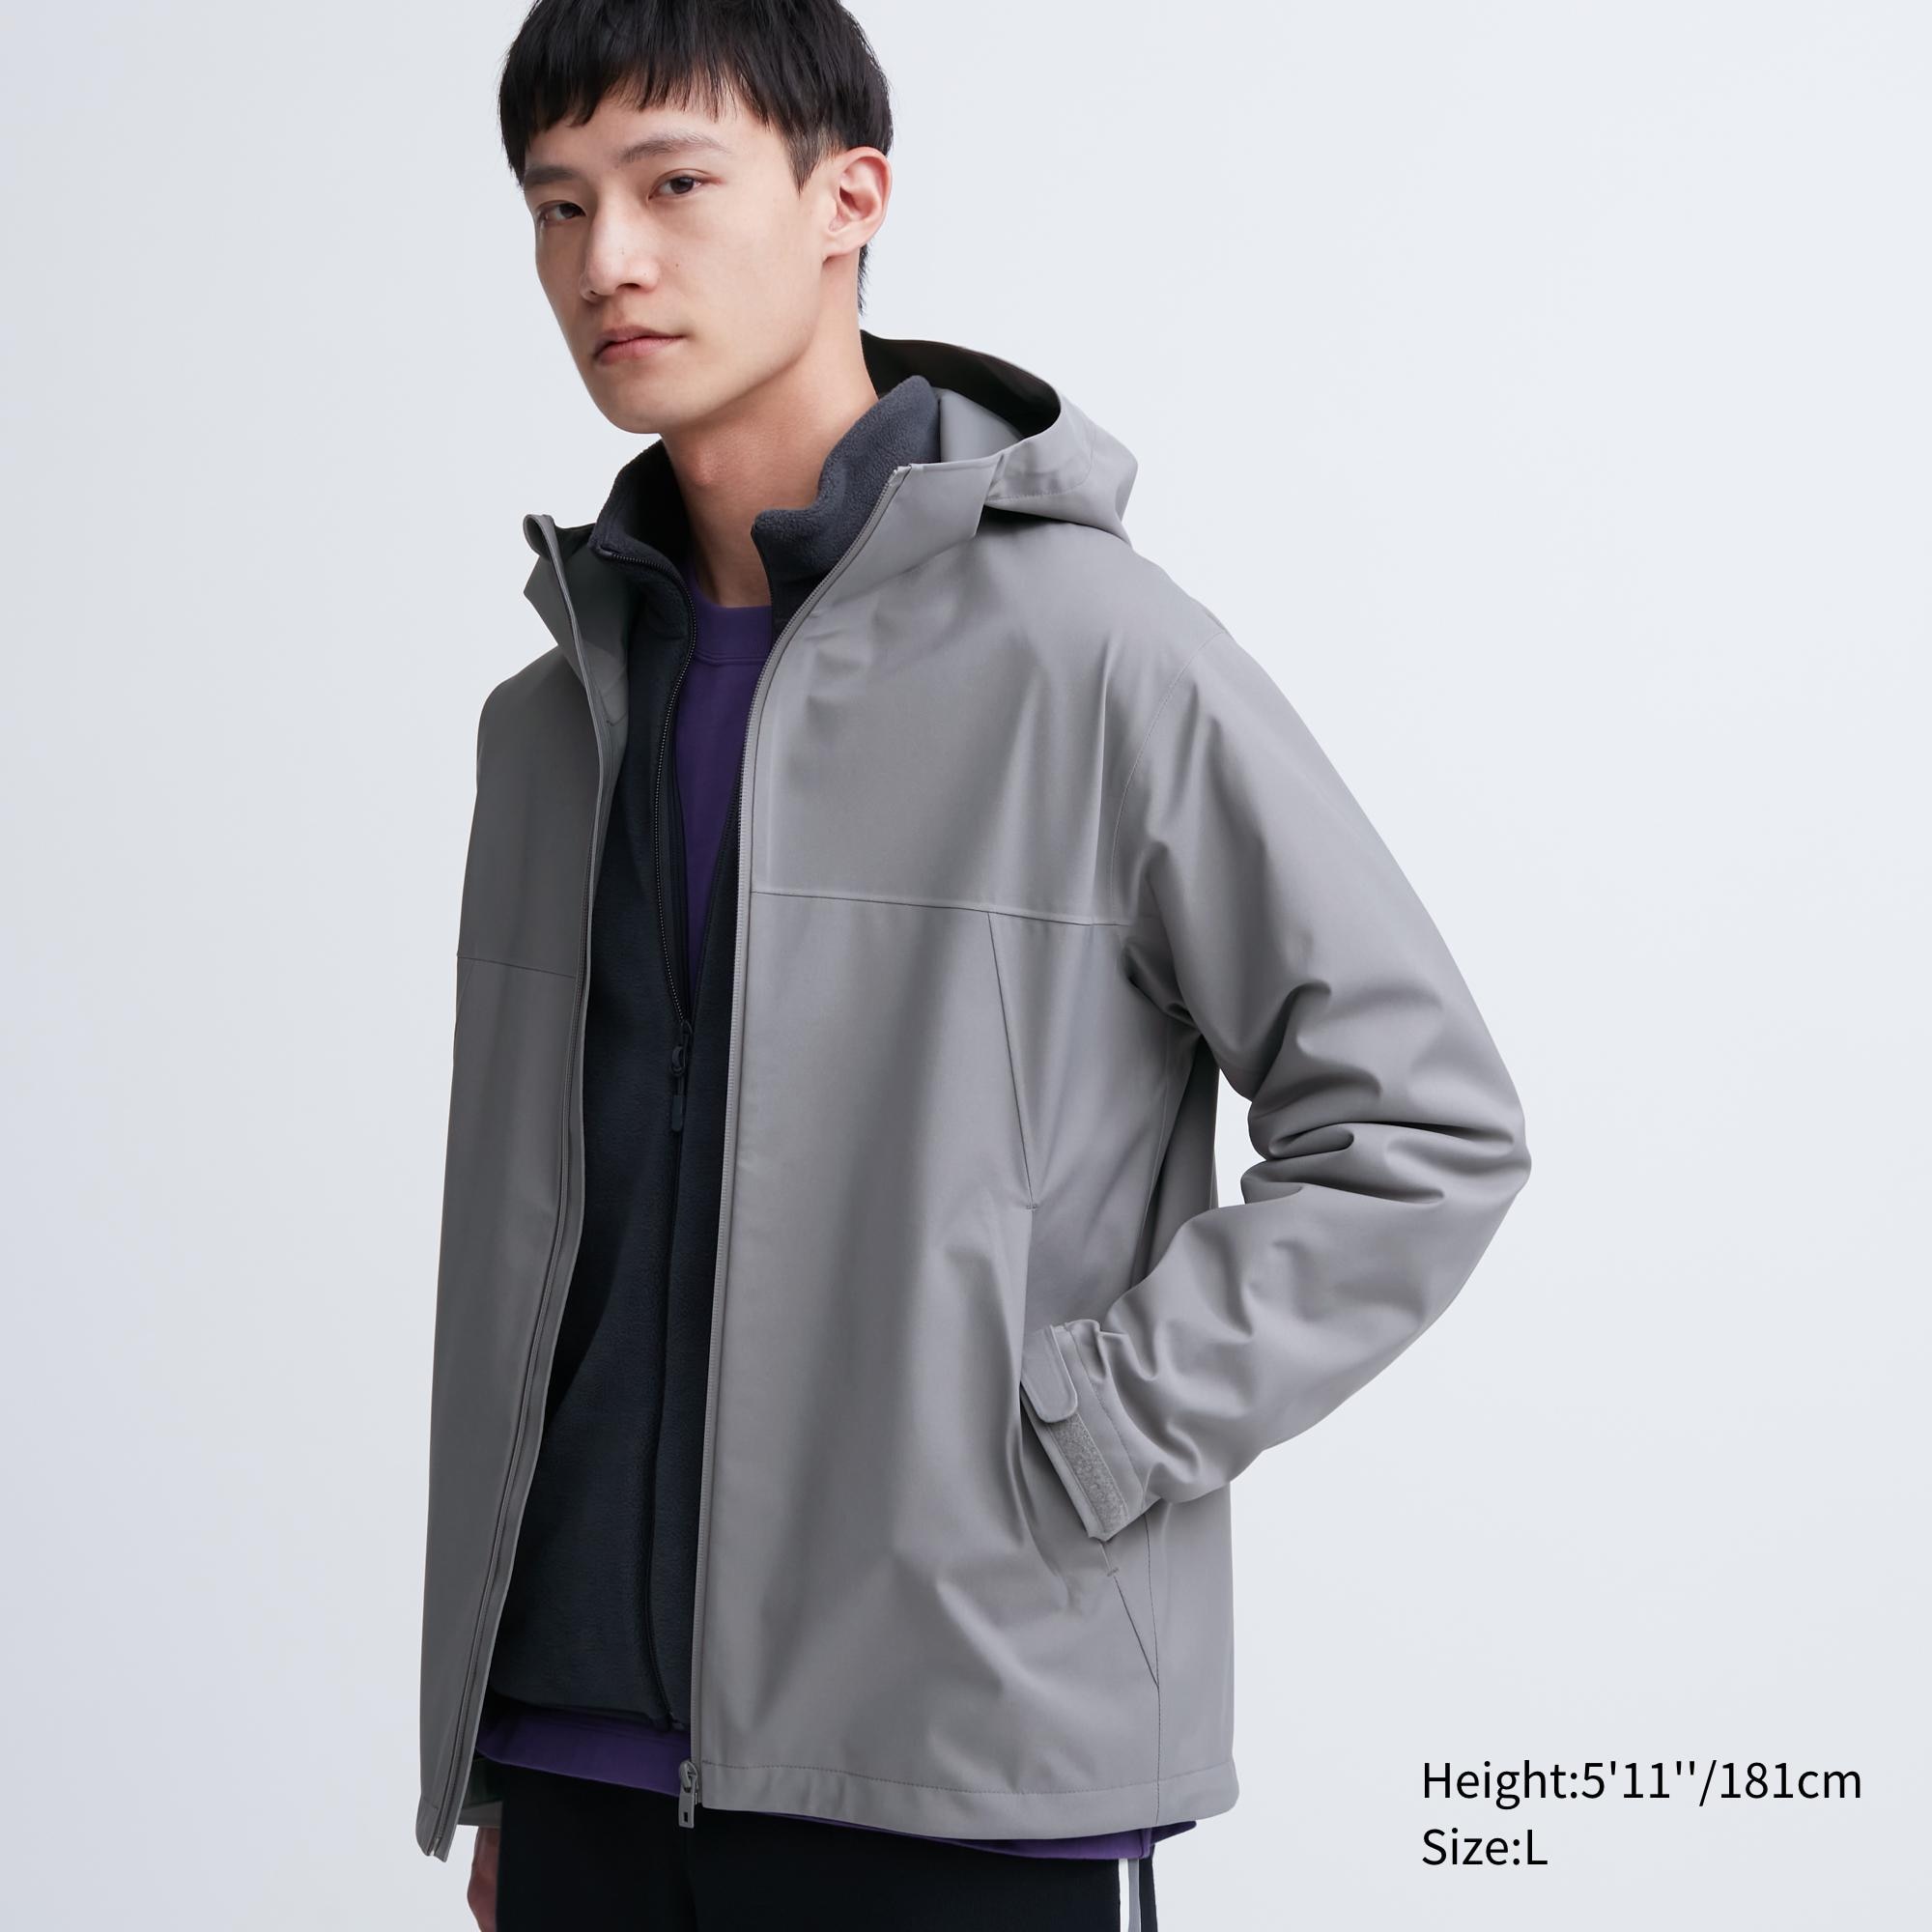 UNIQLO WATER PROOF JACKET Mens Fashion Coats Jackets and Outerwear on  Carousell